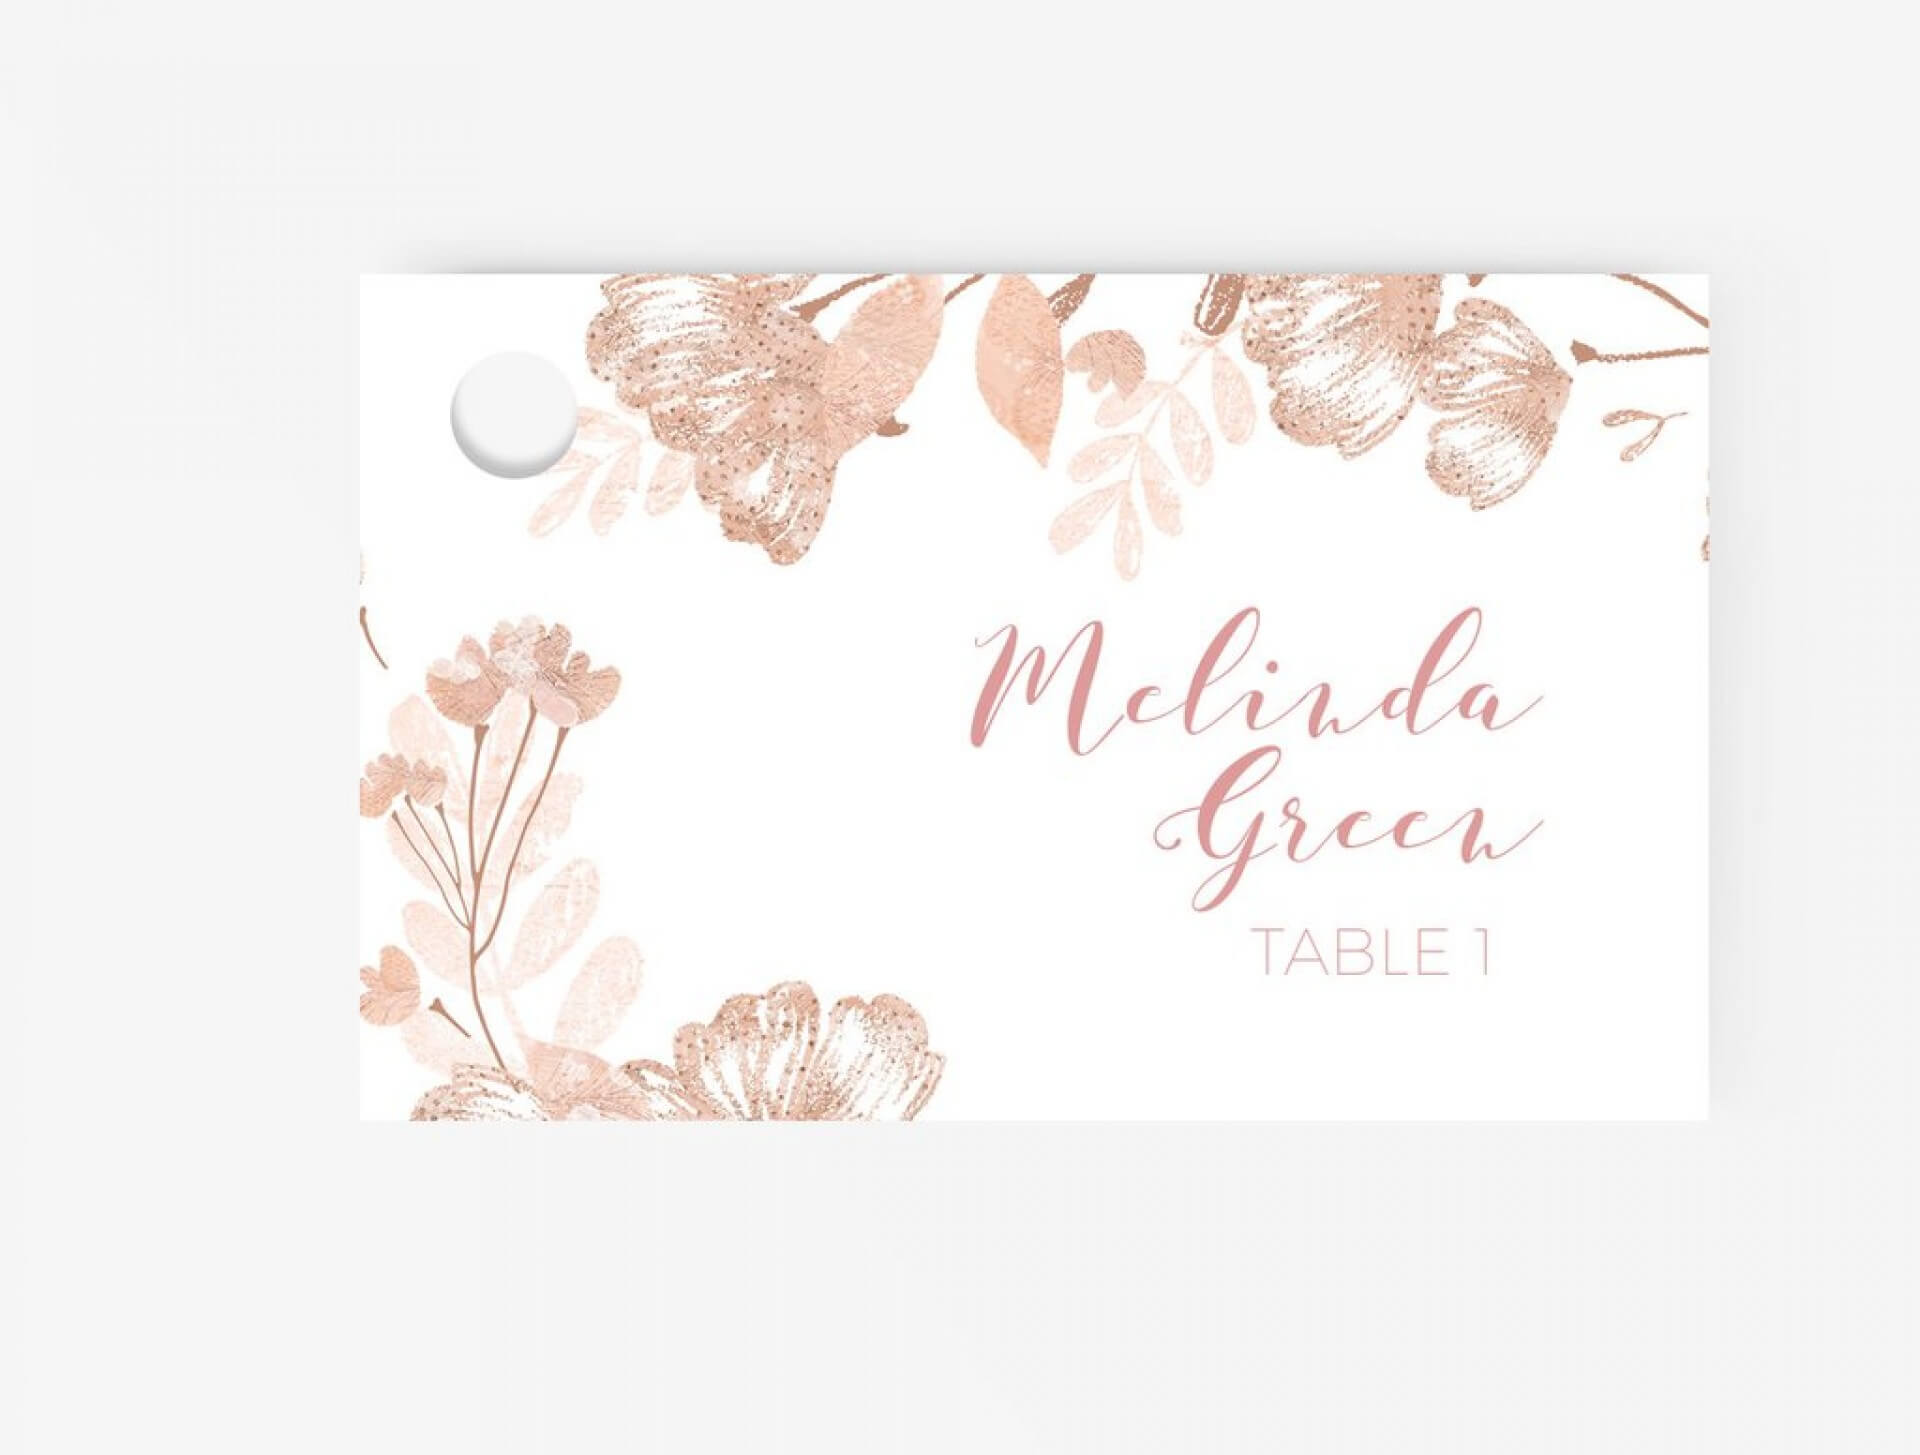 019 Template For Place Cards Il Fullxfull 1542140750 Dg3V Intended For Place Card Template Free 6 Per Page